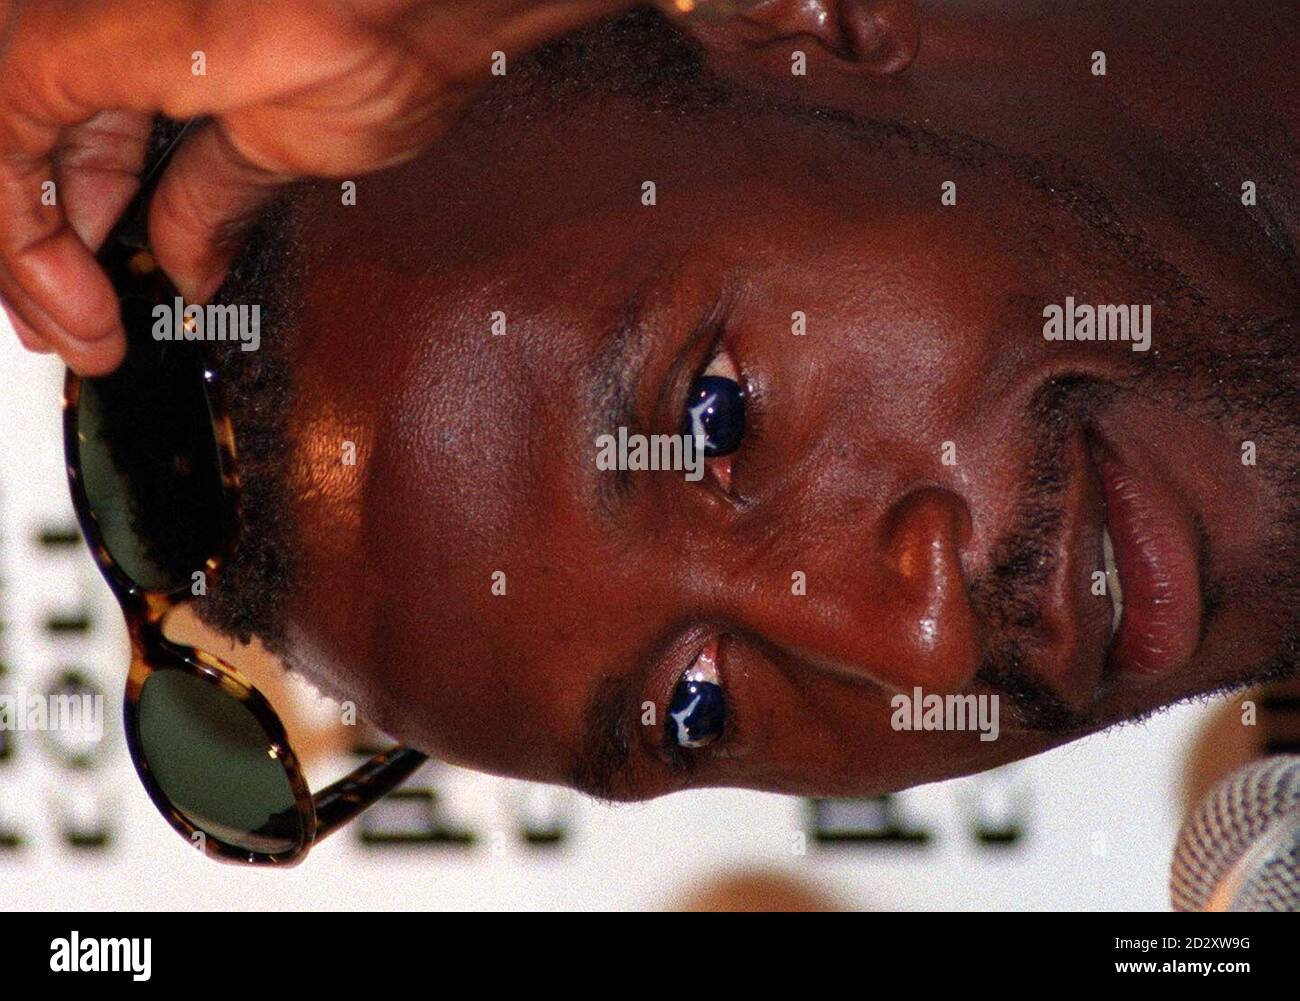 Bkritish sprinter Linford Christie lifts his sunglasses to reveal a pair of Puma  contact lenses during a news conference in Atlanta this morning (Thursday).  Photo by John Giles/PA Stock Photo - Alamy